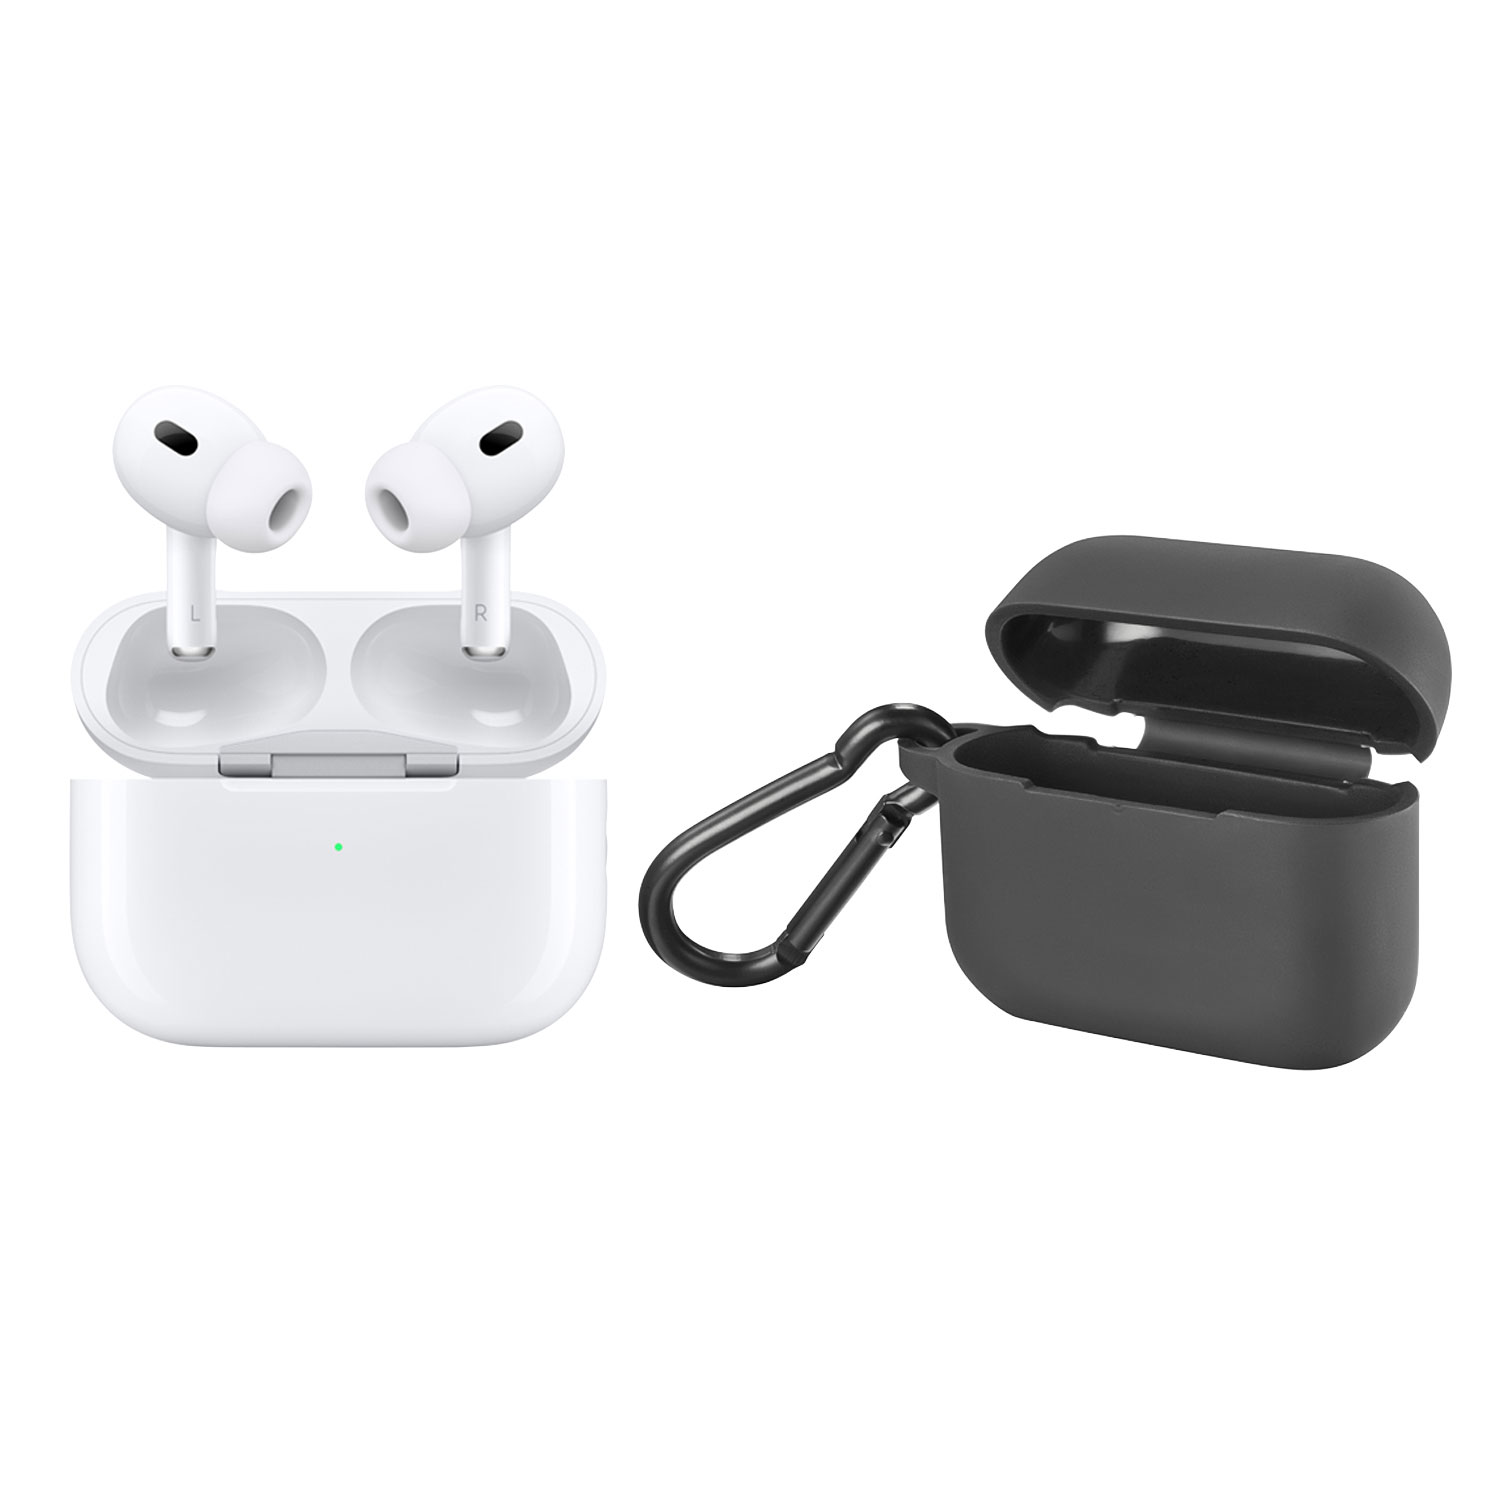 Apple AirPods Pro (2nd gen) Noise Cancelling True Wireless Earbuds w/ USB-C MagSafe Charging Case & Silicone Case